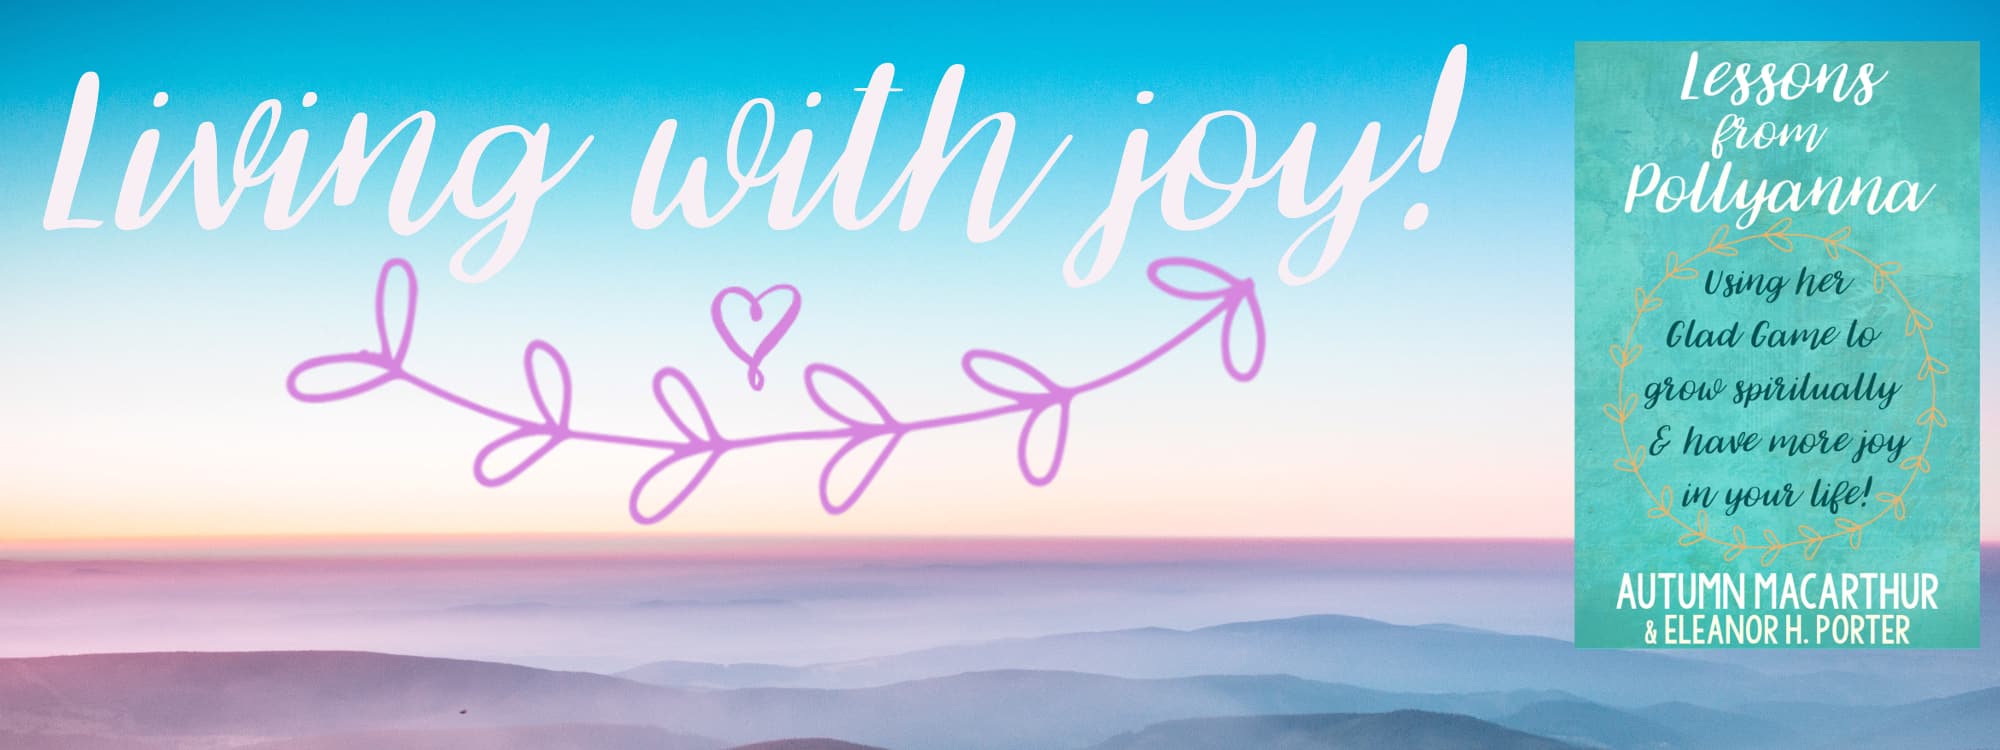 Living with joy with Lessons from Pollyanna by Autumn Macarthur